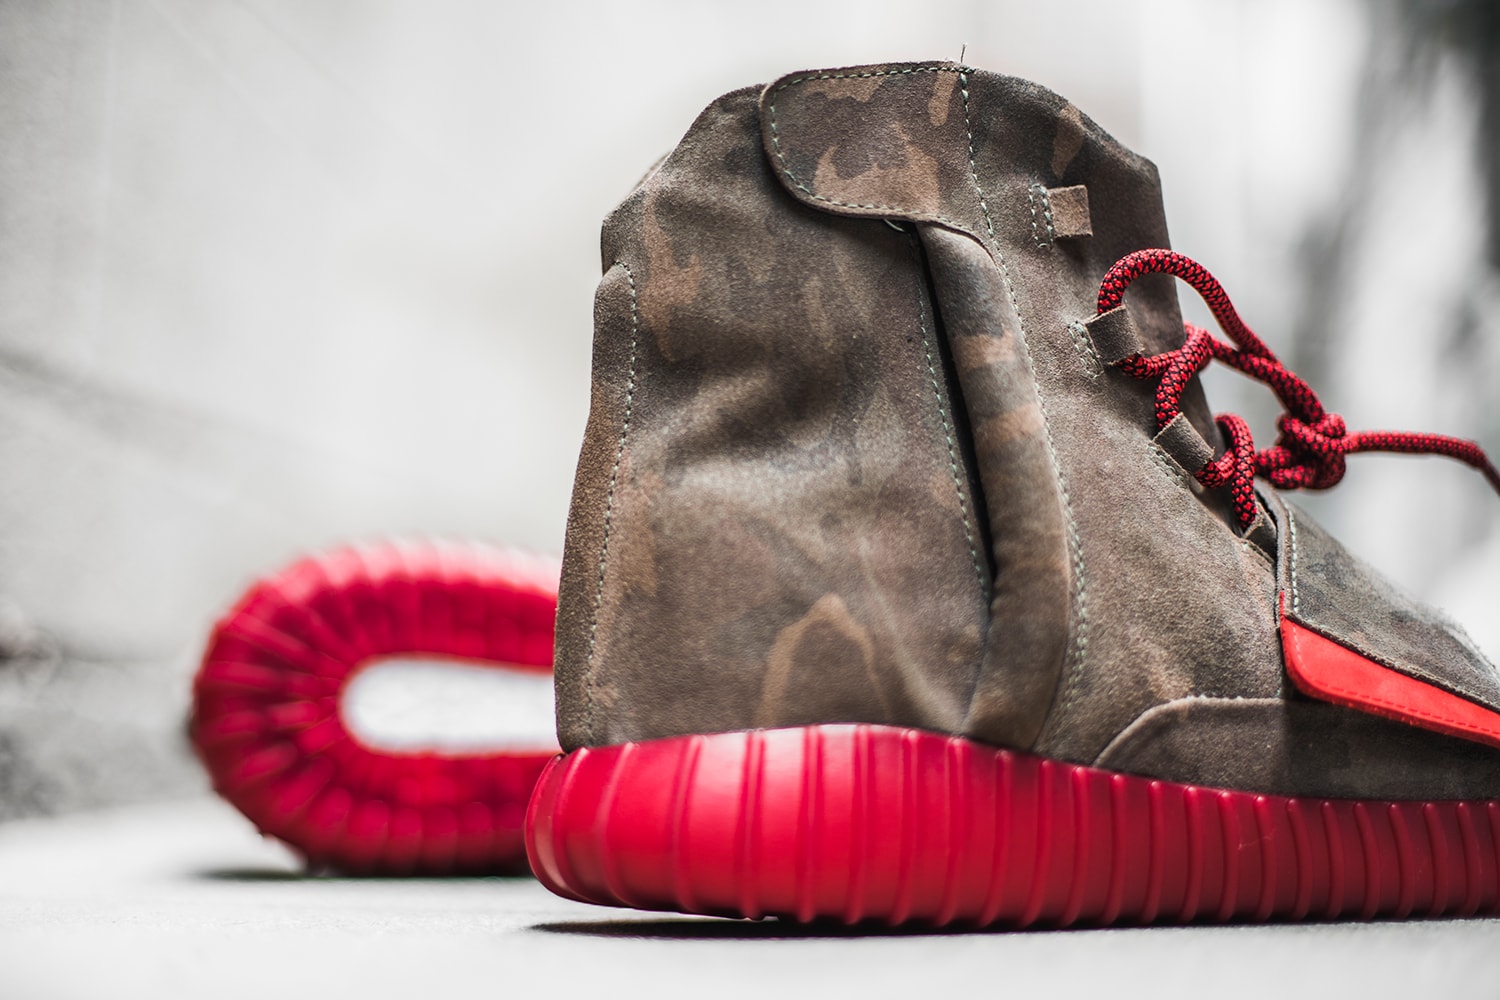 The Shoe Surgeon's Custom YEEZY BOOST 750 Will Cost You $2,200 USD Kanye West Camo Brown Suede Red BOOST Midsole